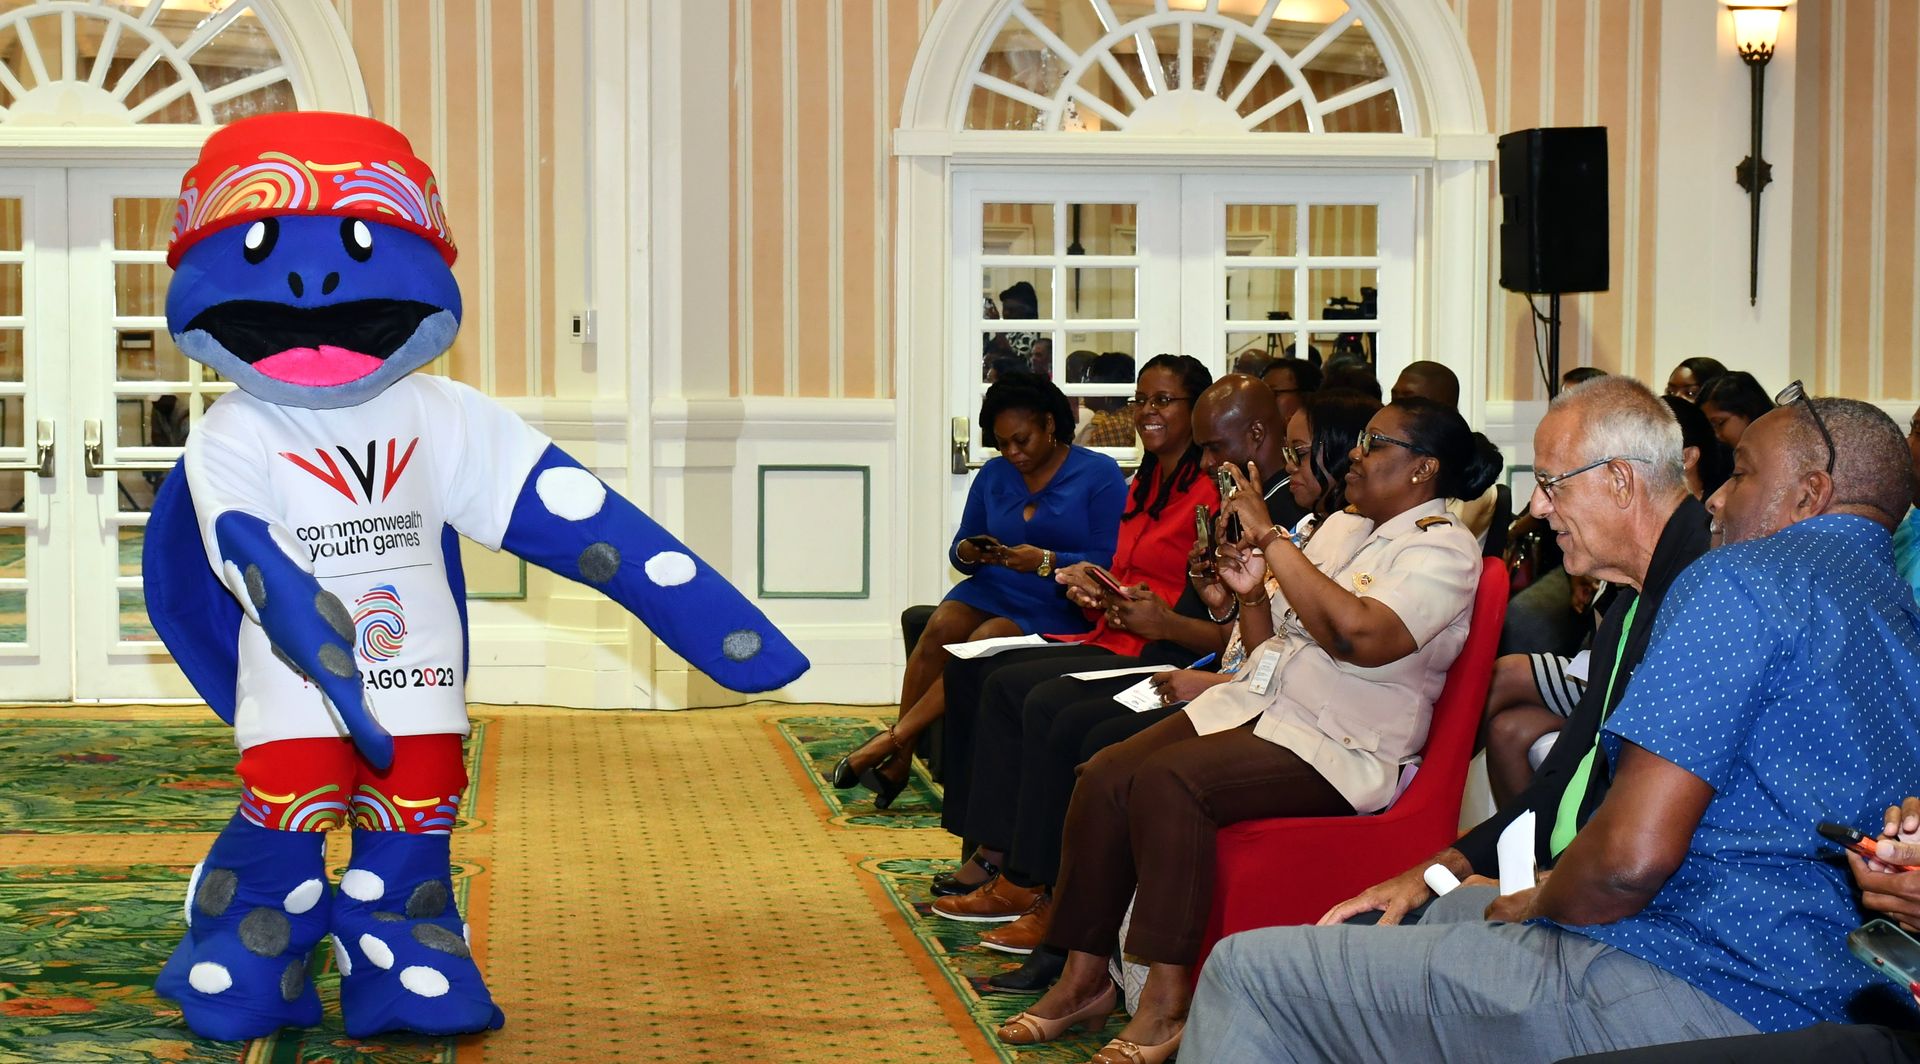 The 2023 Commonwealth Youth Games Mascot Cocoyea dances for the audience during a press conference at Magdalena Grand, Lowlands, Tobago on July 18, 2023.  VINDRA GOPAUL (Image obtained at guardian.co.tt)